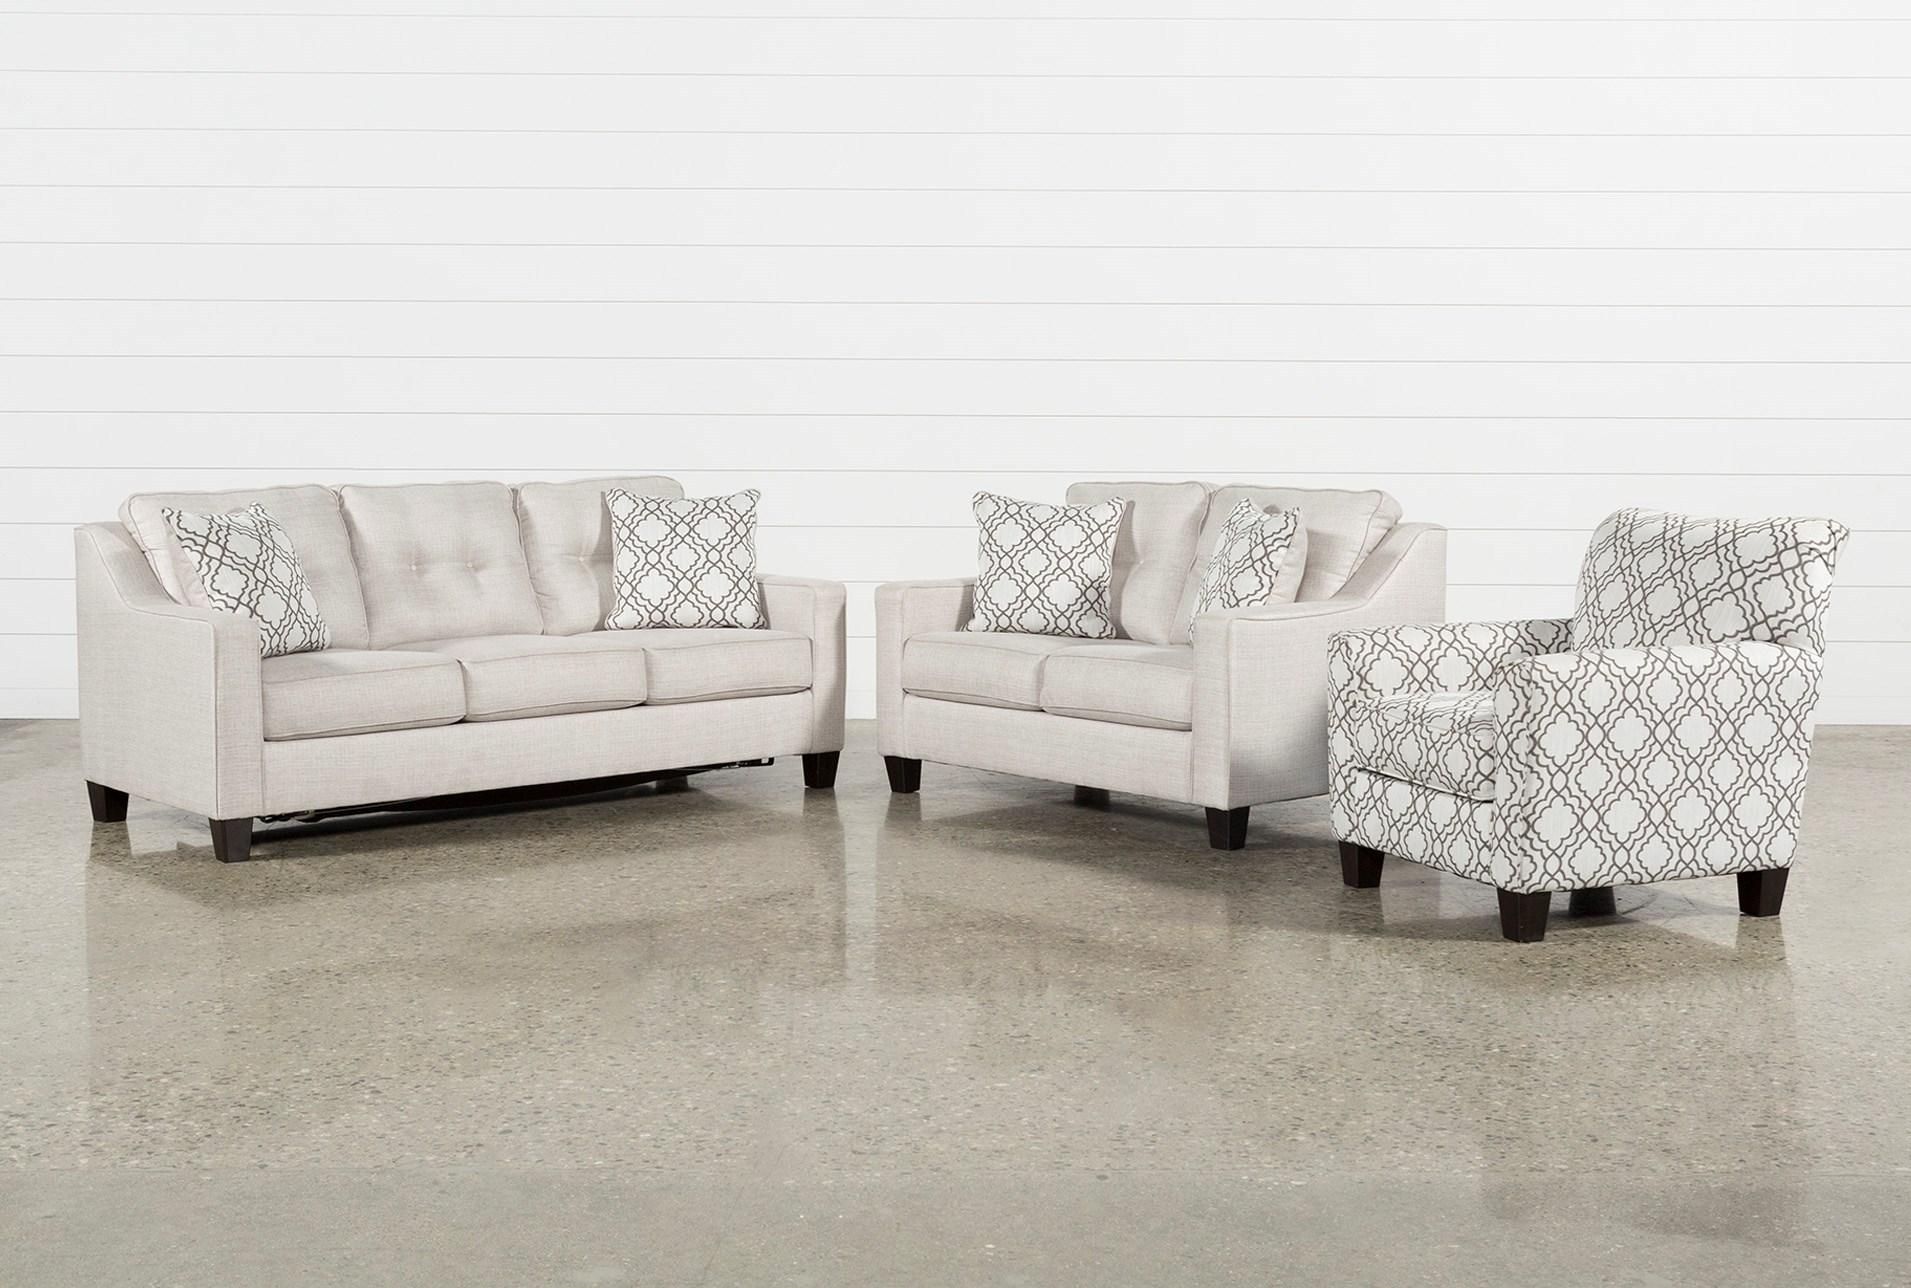 3 Piece Living Room Set Casta Products Pinterest Sofa And Small Throughout Mcdade Ash Sofa Chairs (View 5 of 20)